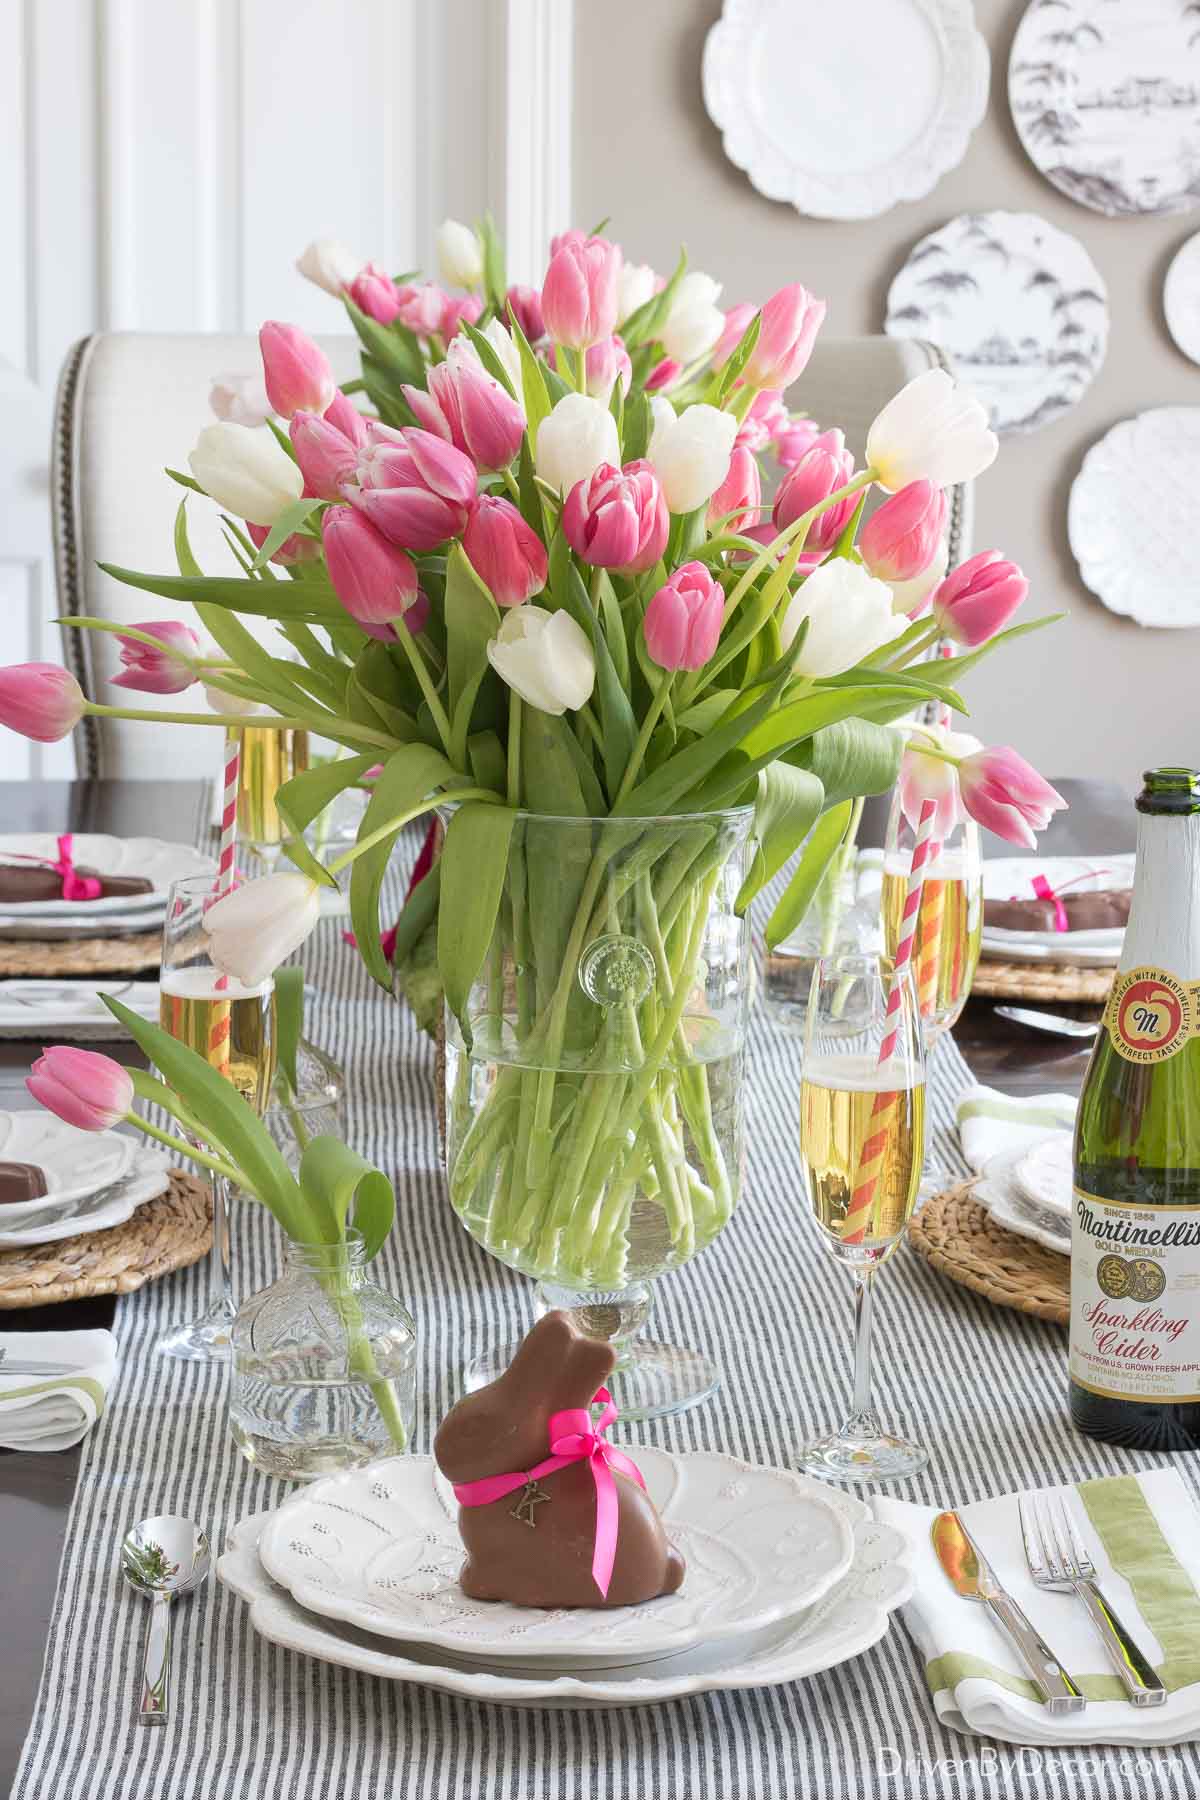 Chocolate bunny on plate with vase full of tulips